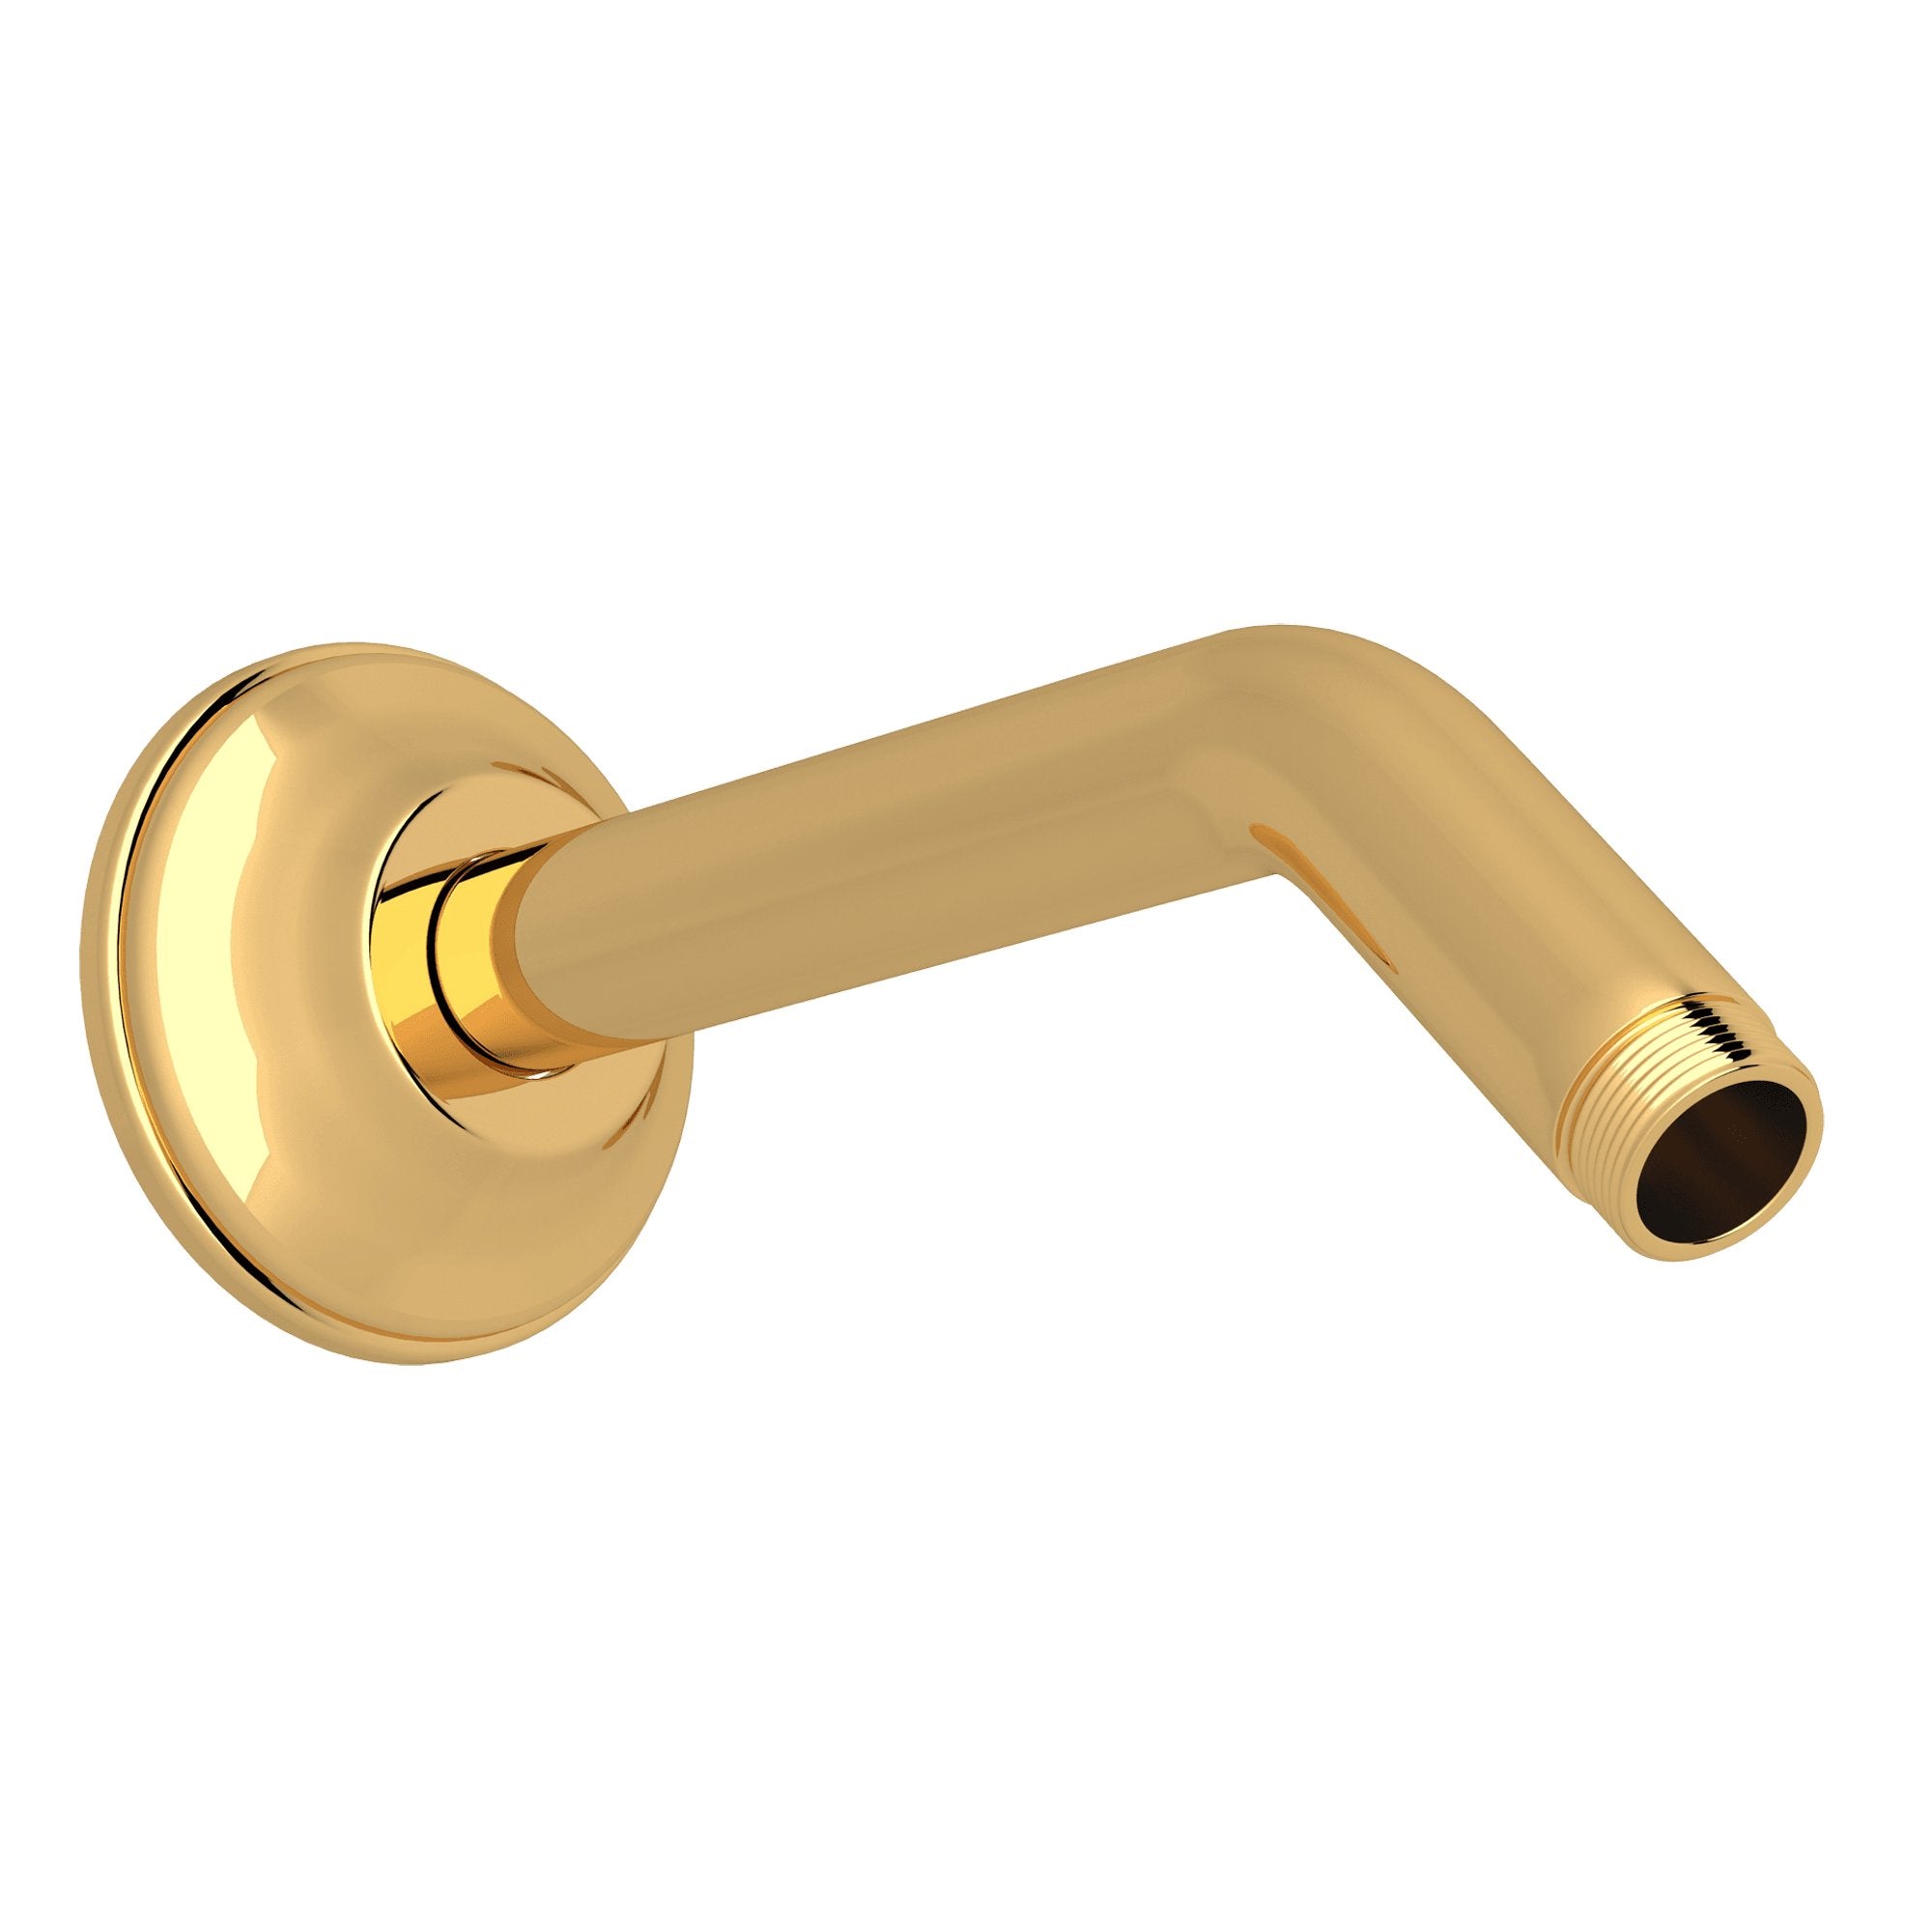 ROHL 12 1/4 Inch Wall Mount Shower Arm - Unlacquered Brass